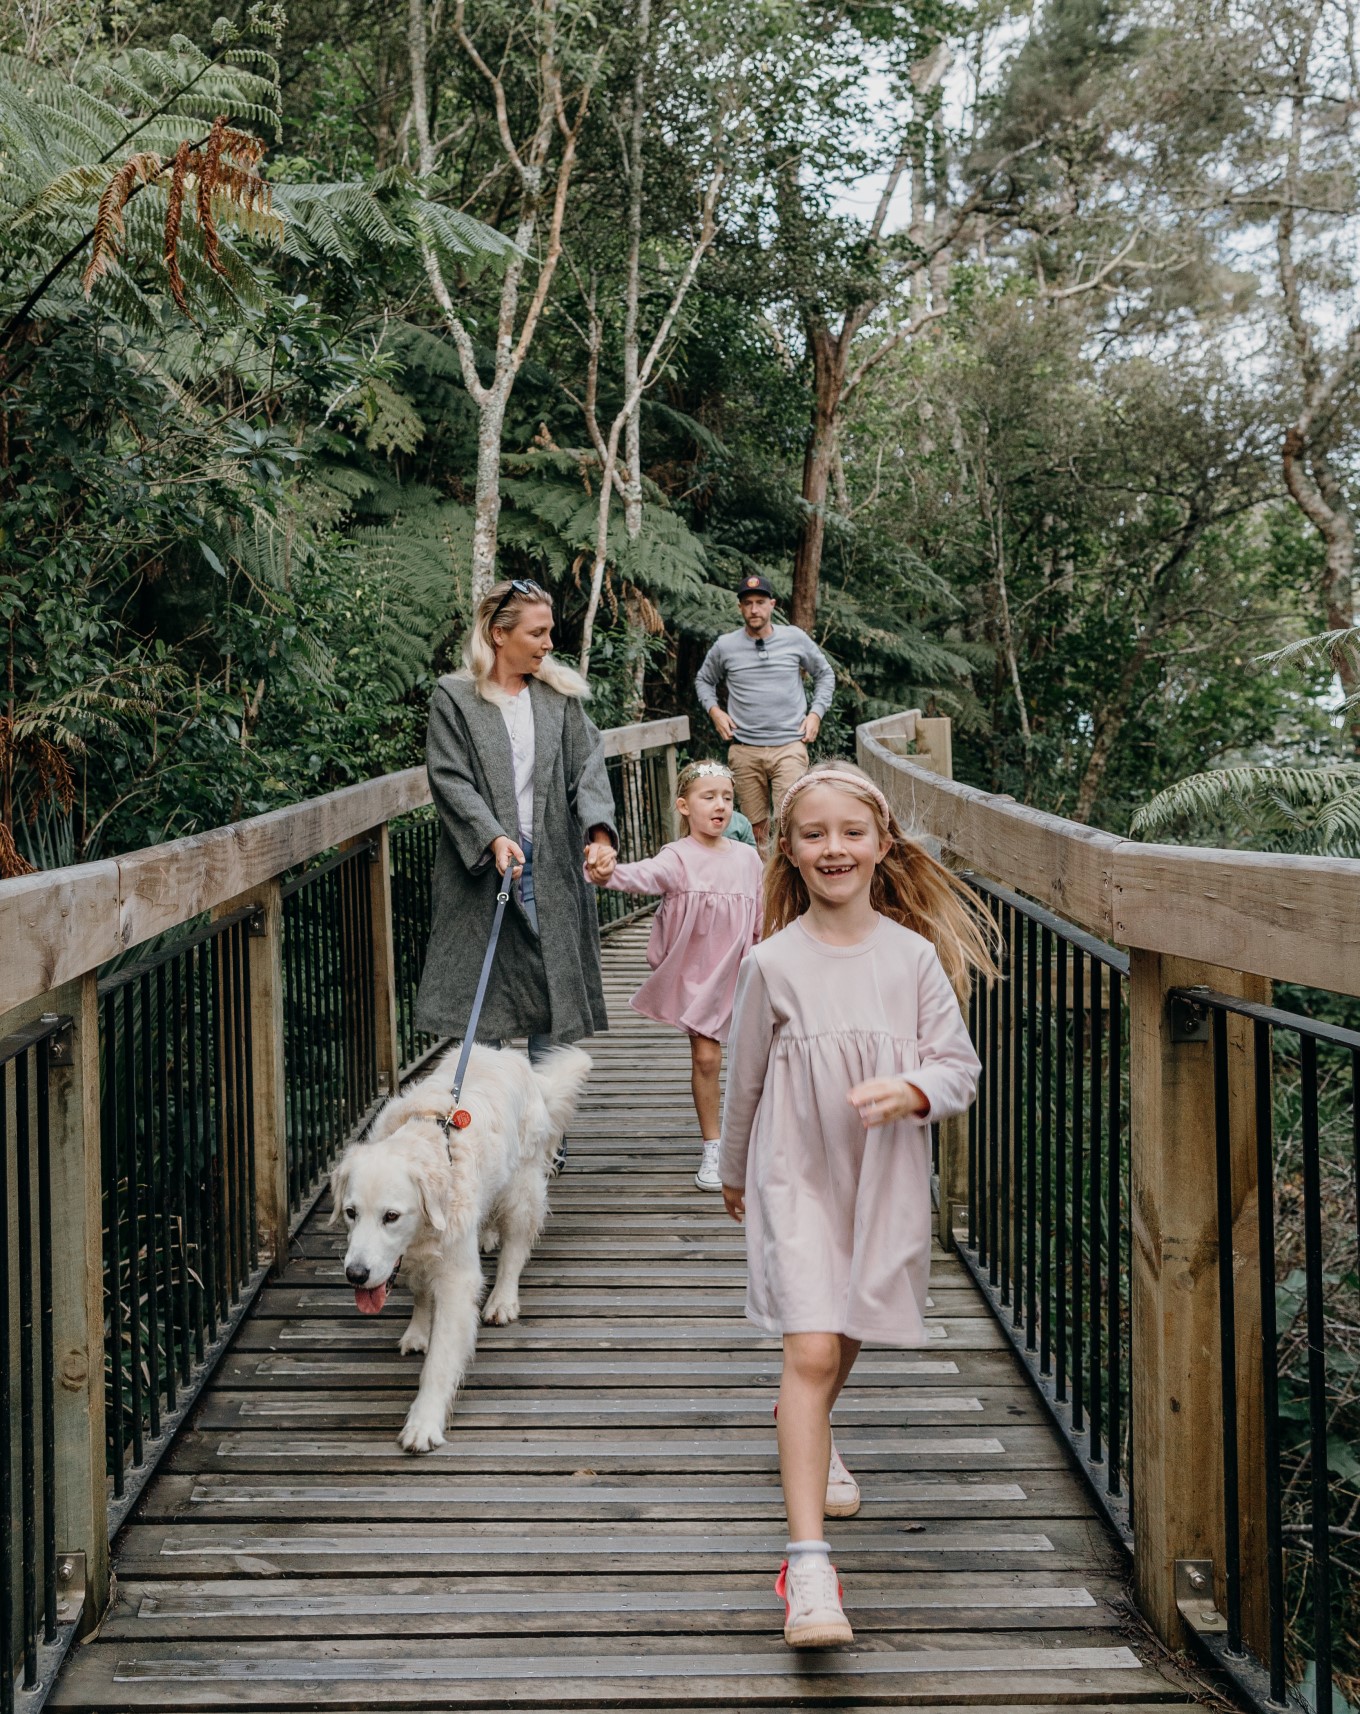 Family and dog walking along wooden boardwalk with native bush on each side